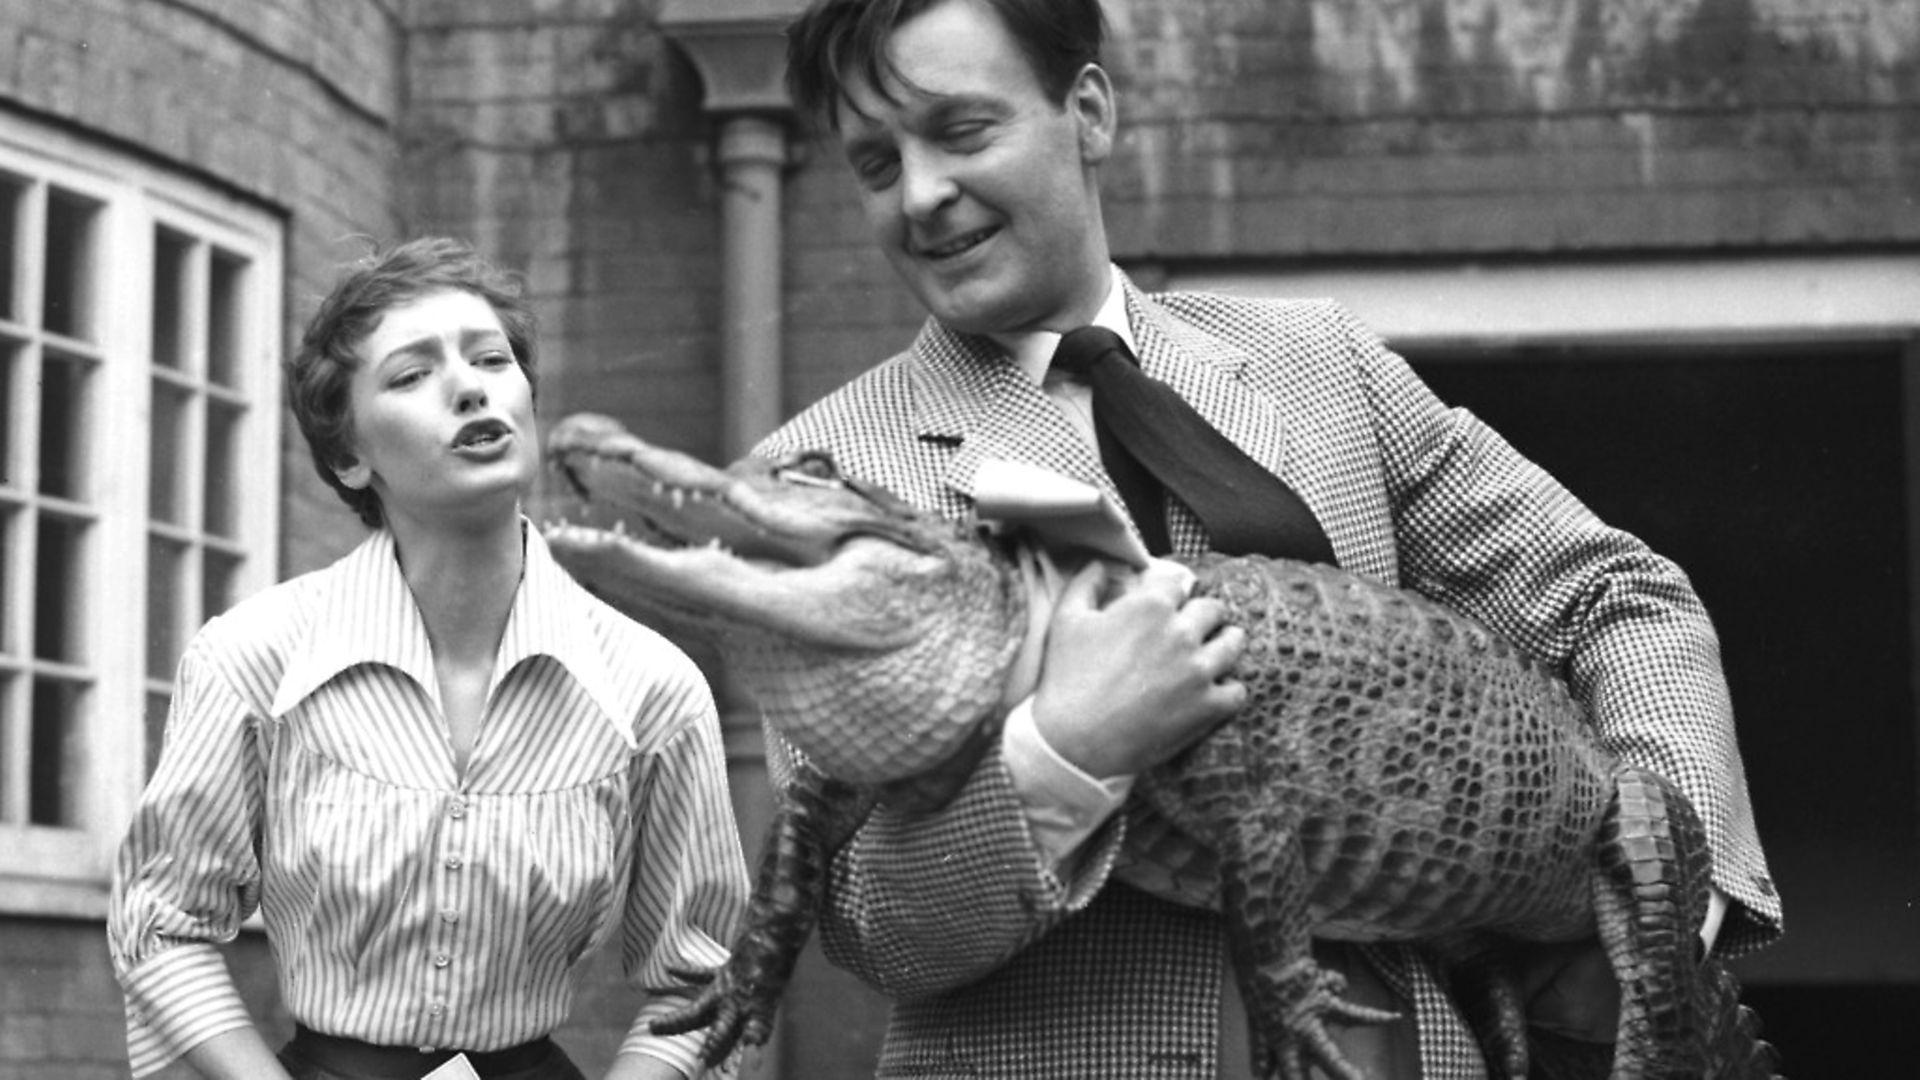 Jennie Carson and Donald Sinden during filming for An Alligator Named Daisy, 1955. Picture: Getty Images - Credit: Getty Images